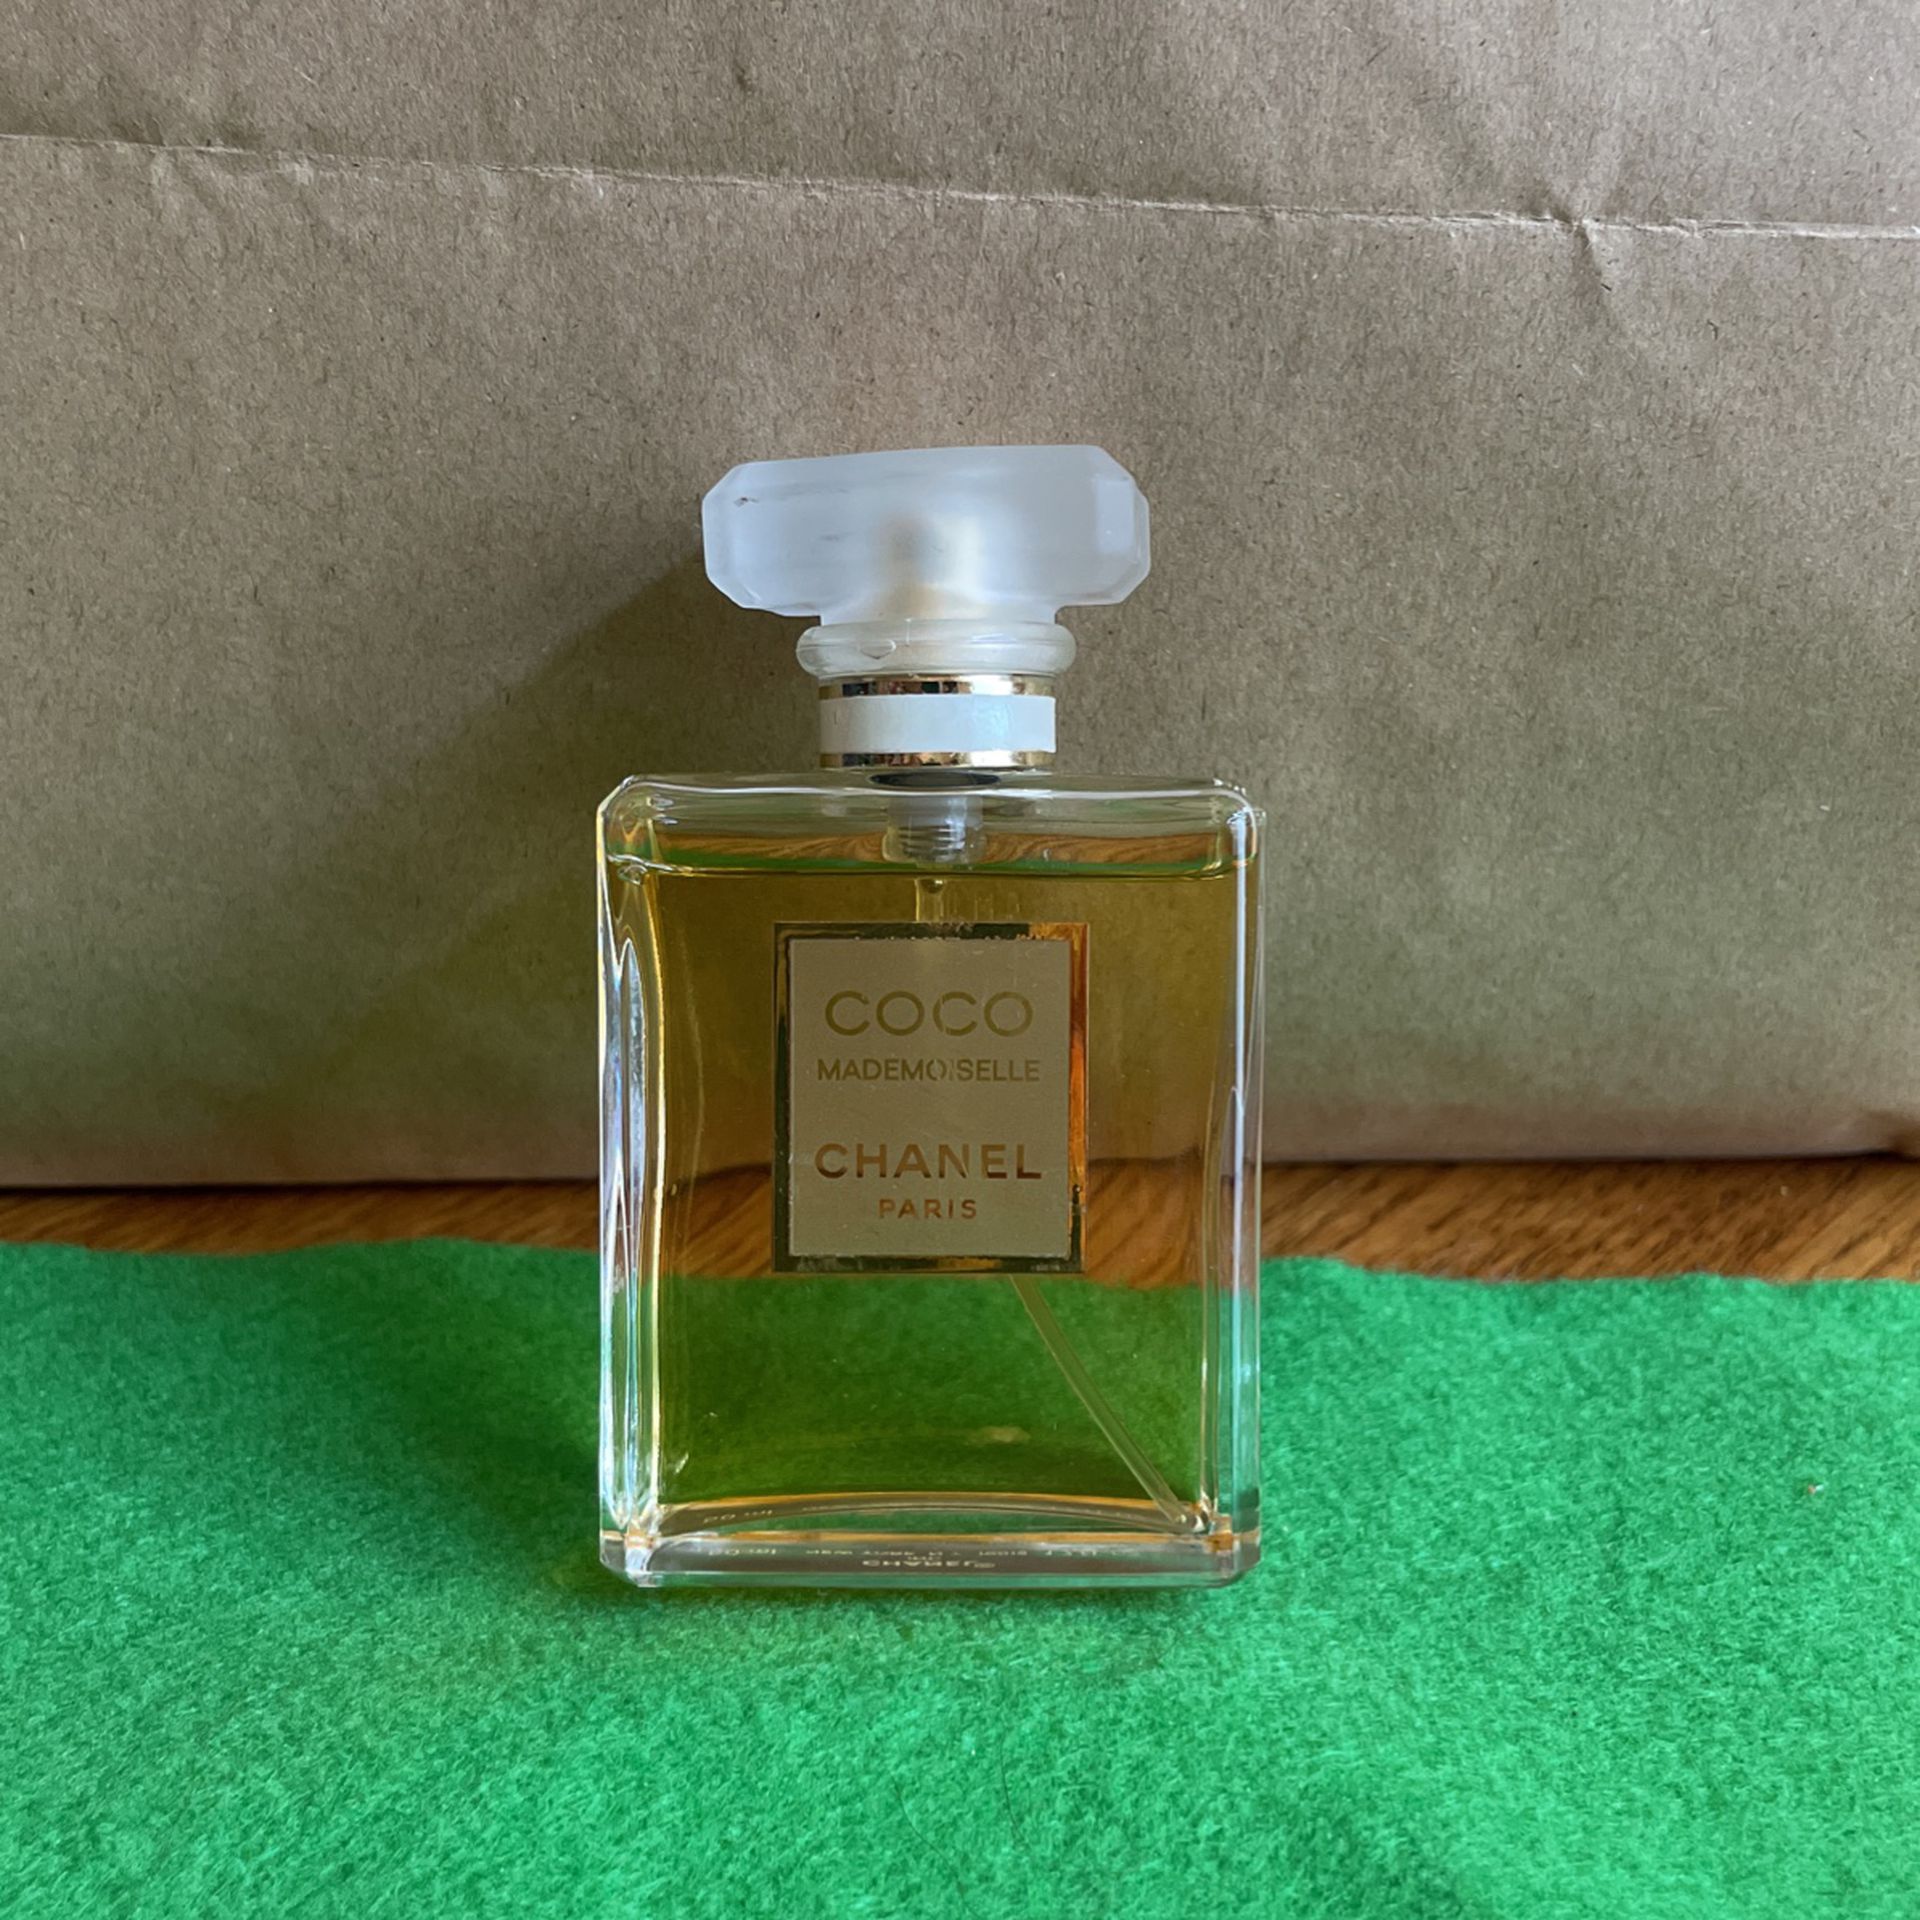 Coco Mademoiselle Chanel Eau De Parfum - Used, No Box for Sale in San  Diego, CA - OfferUp